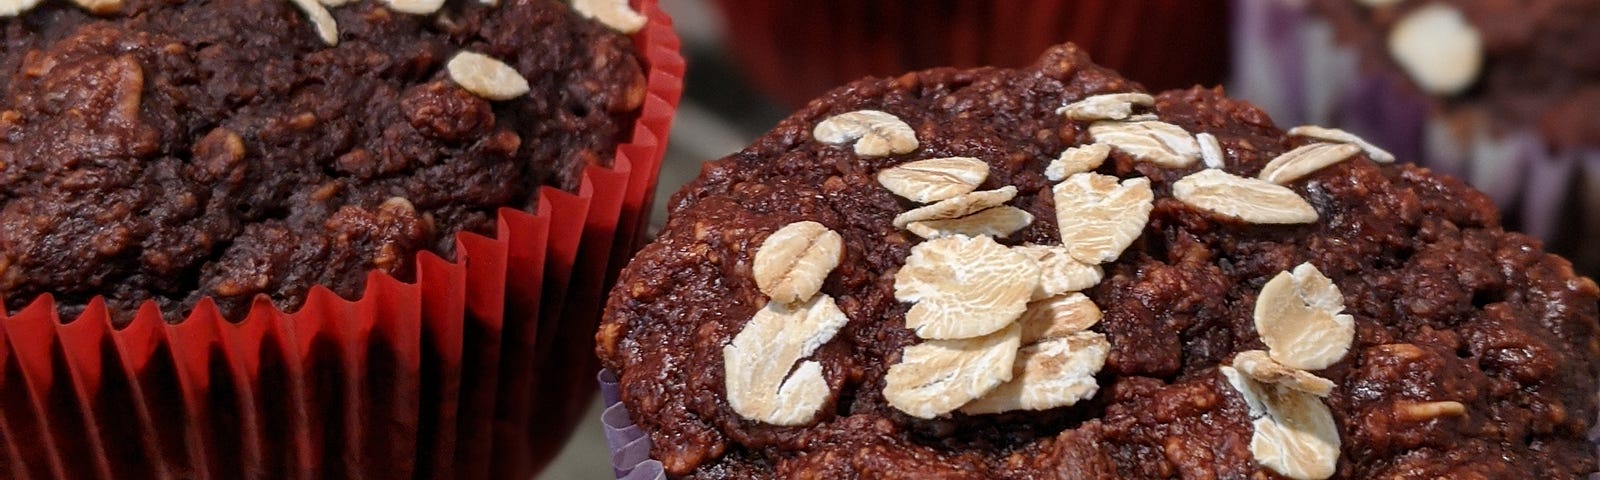 Image of muffins by the author.